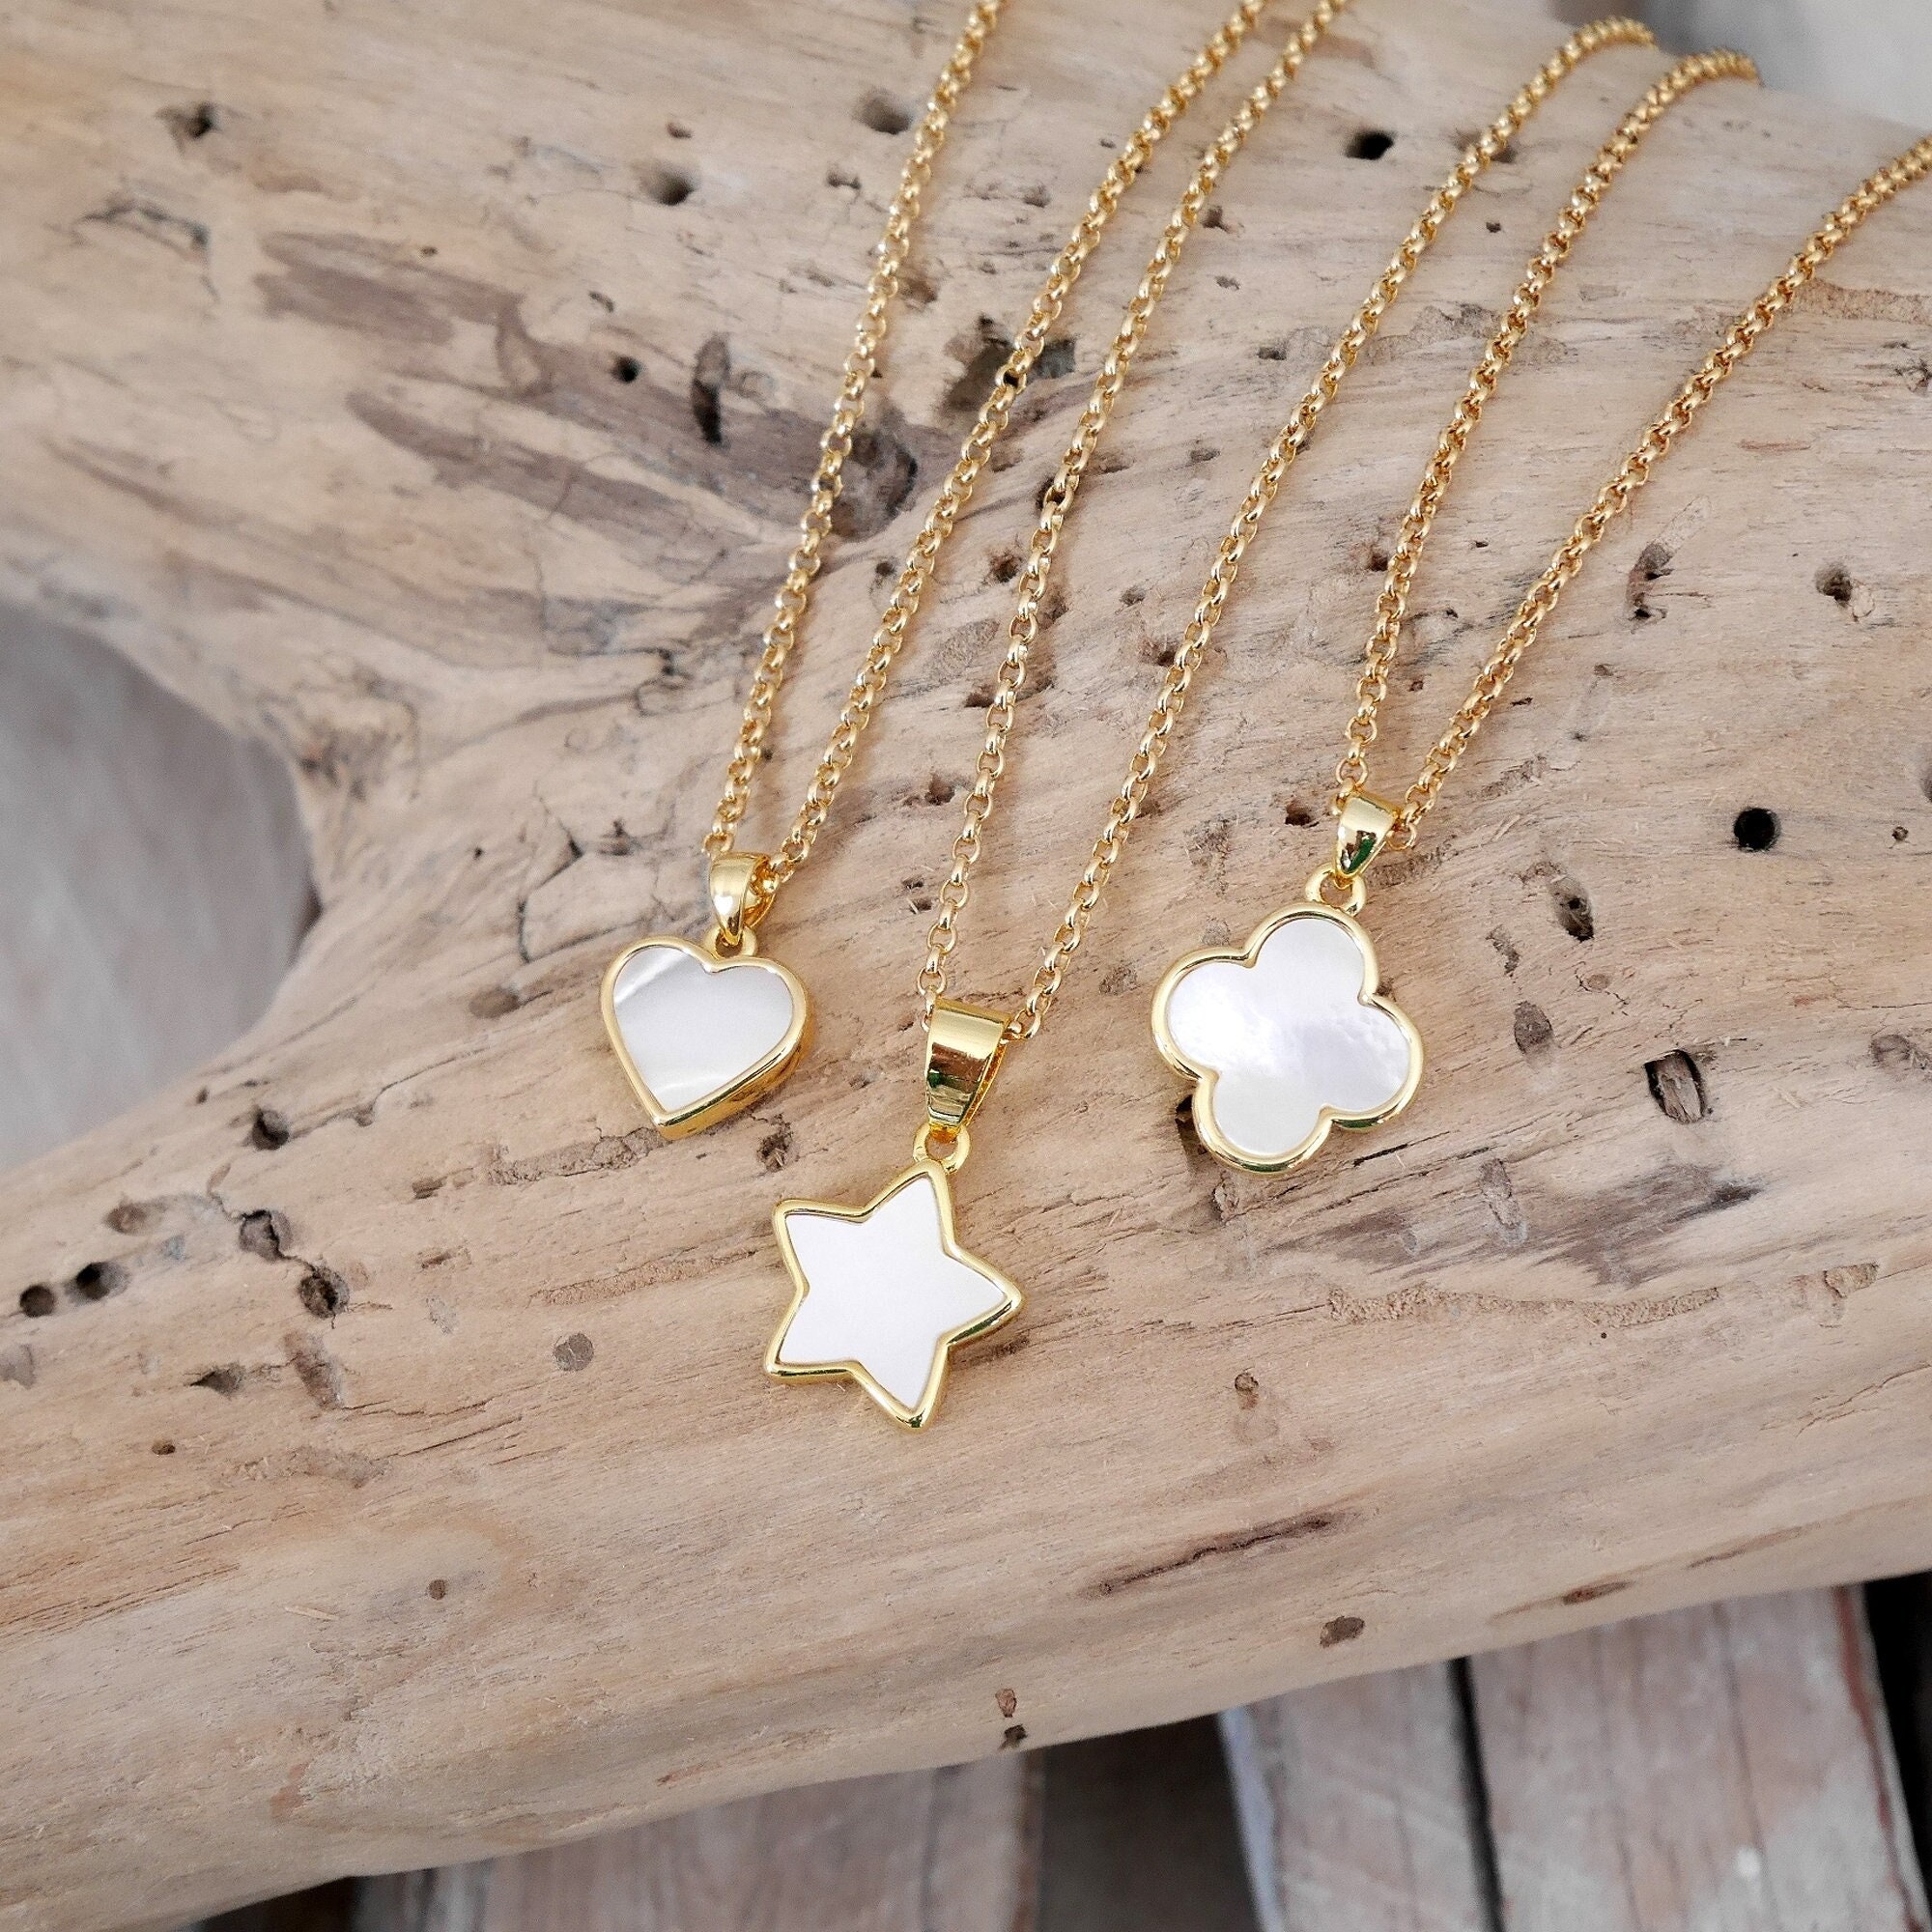 Fine Gold Chain Necklace, Mother-of-pearl Star, Heart or Clover Pendant.  COCH35 Christmas Gift for Woman or Girl - Etsy